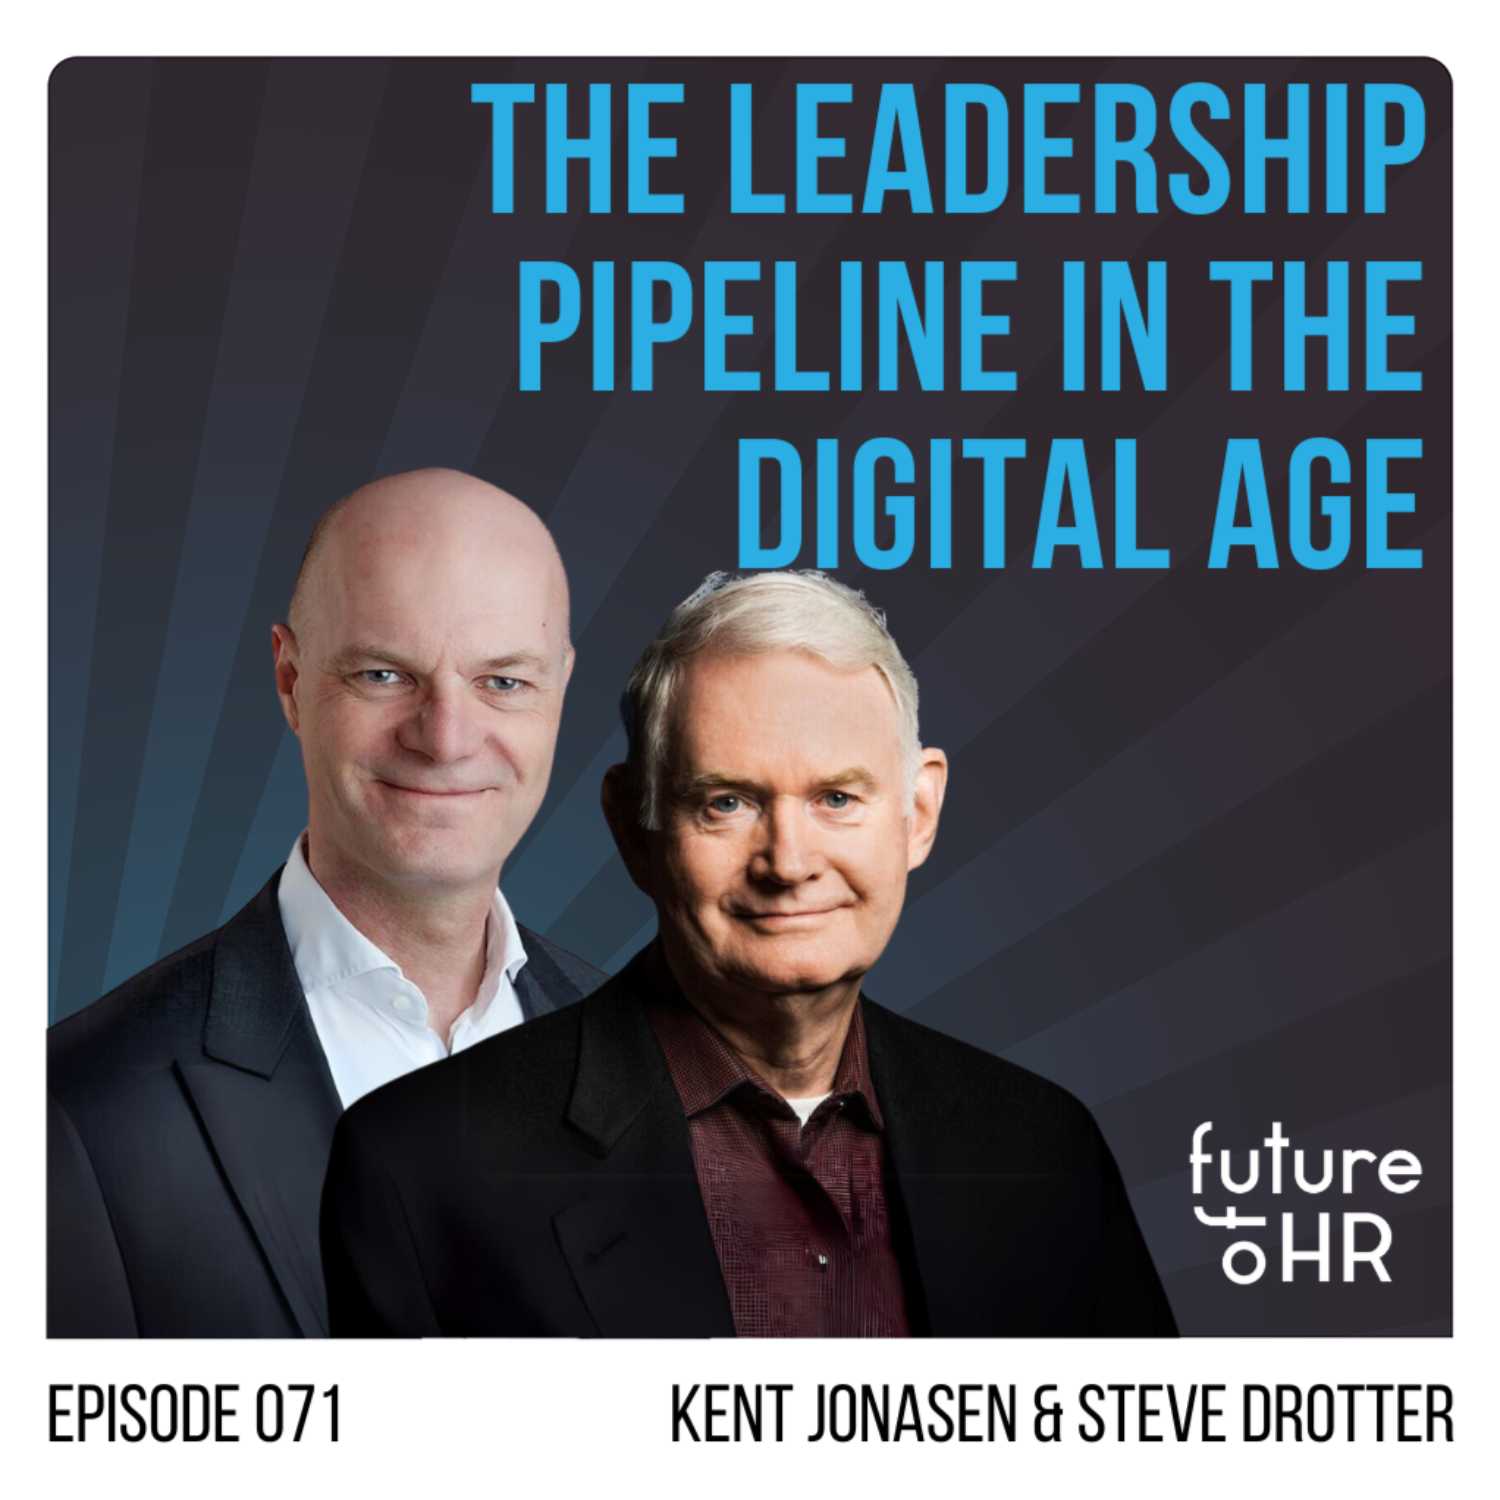 "The Leadership Pipeline in the Digital Age” with Steve Drotter and Kent Jonasen, Co-Founders of The Leadership Pipeline Institute